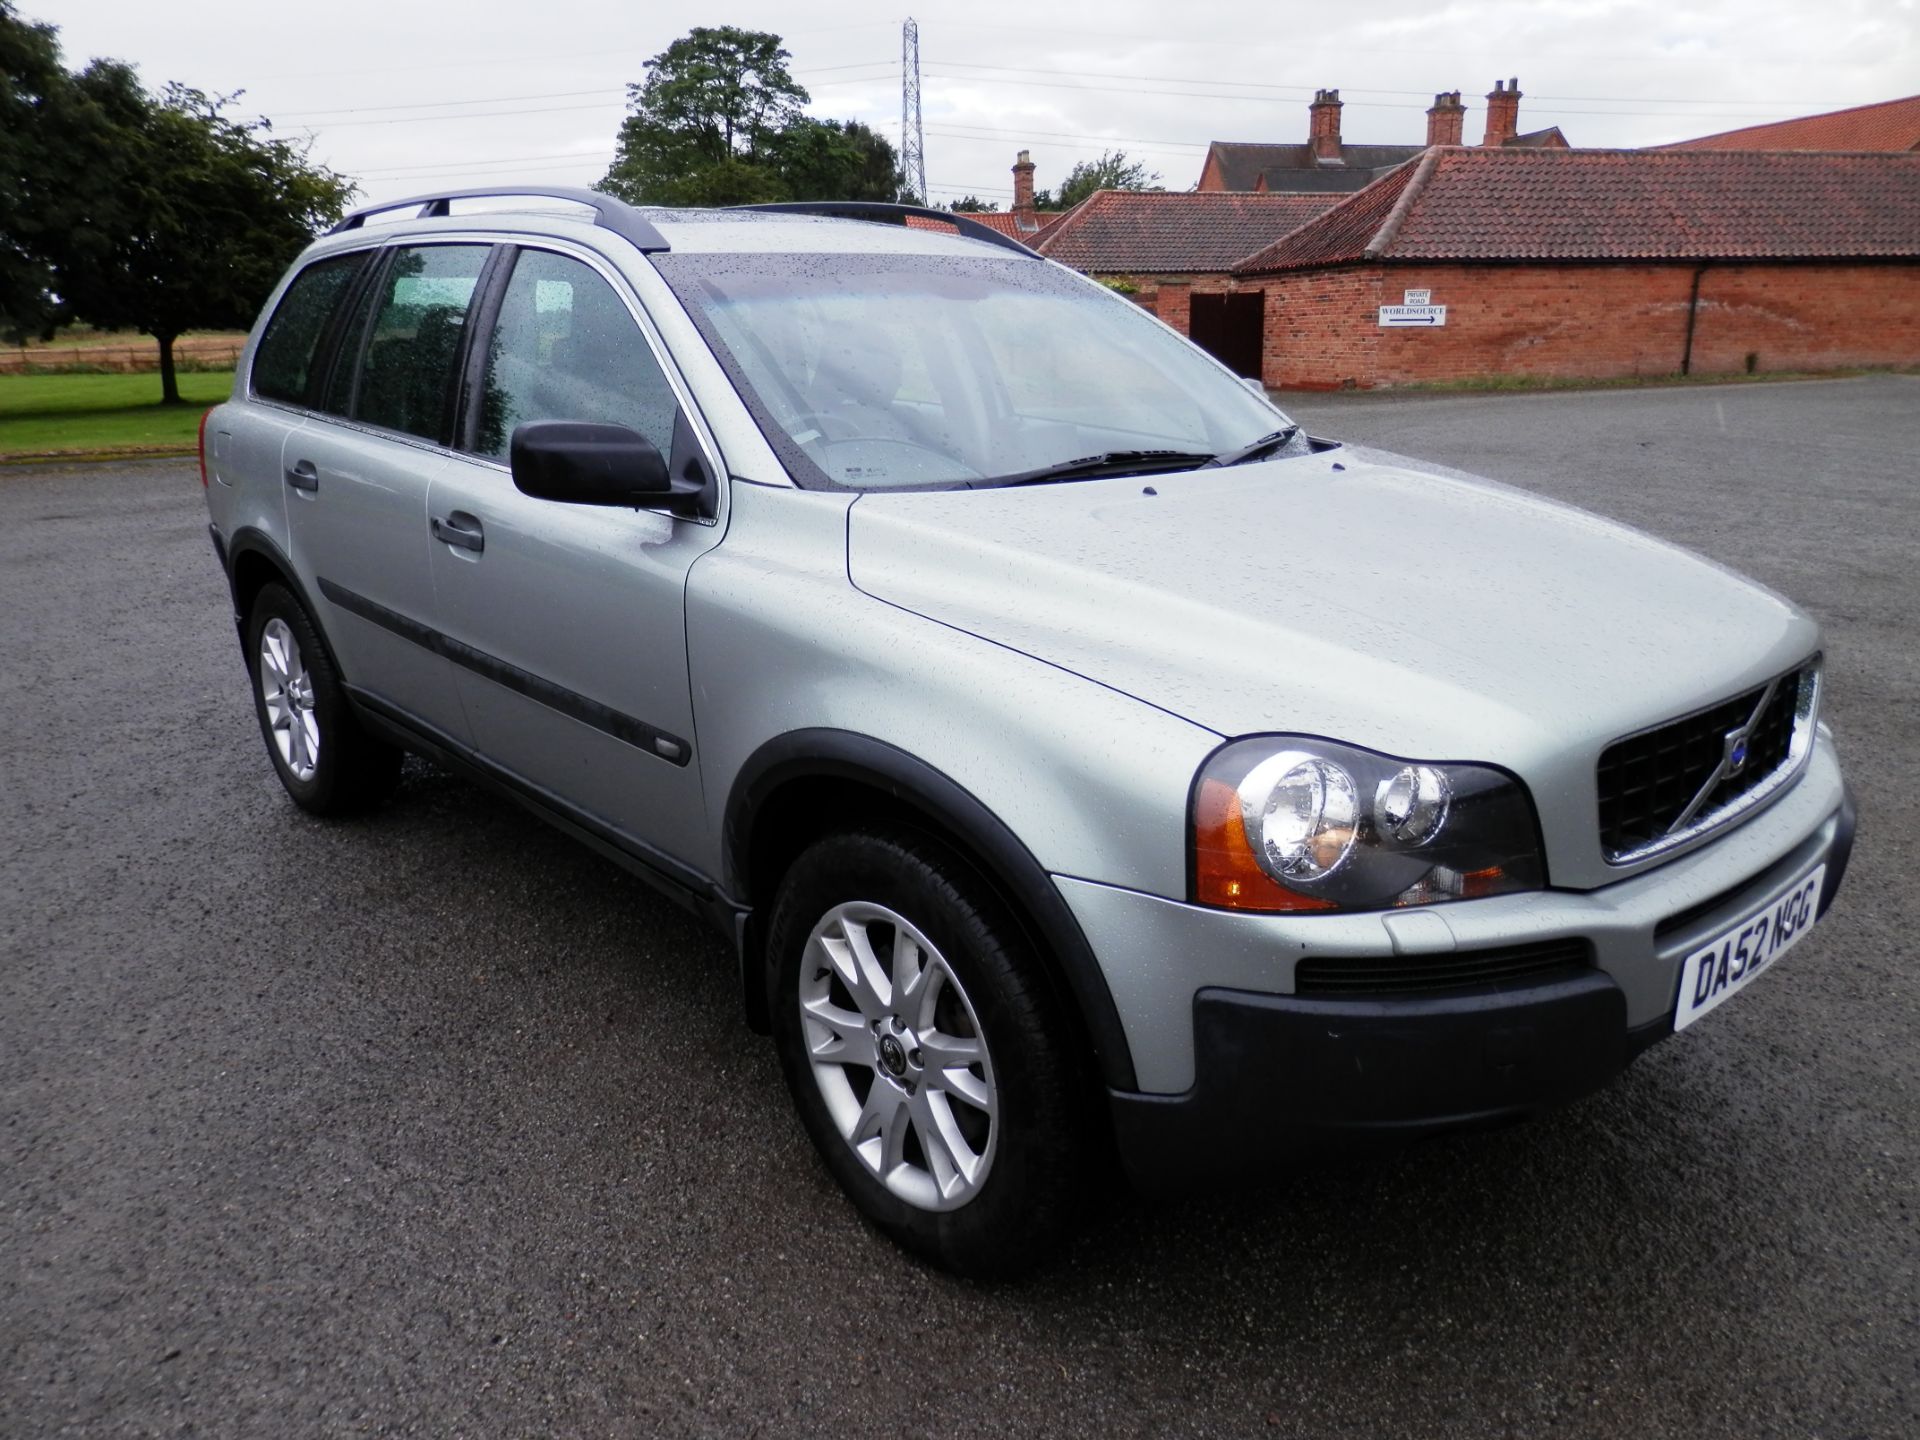 2003/52 PLATE VOLVO XC90 2.4 DIESEL D5 AWD 4X4, AUTOMATIC, FULL BLACK LEATHER 7 SEATER, FULL HISTORY